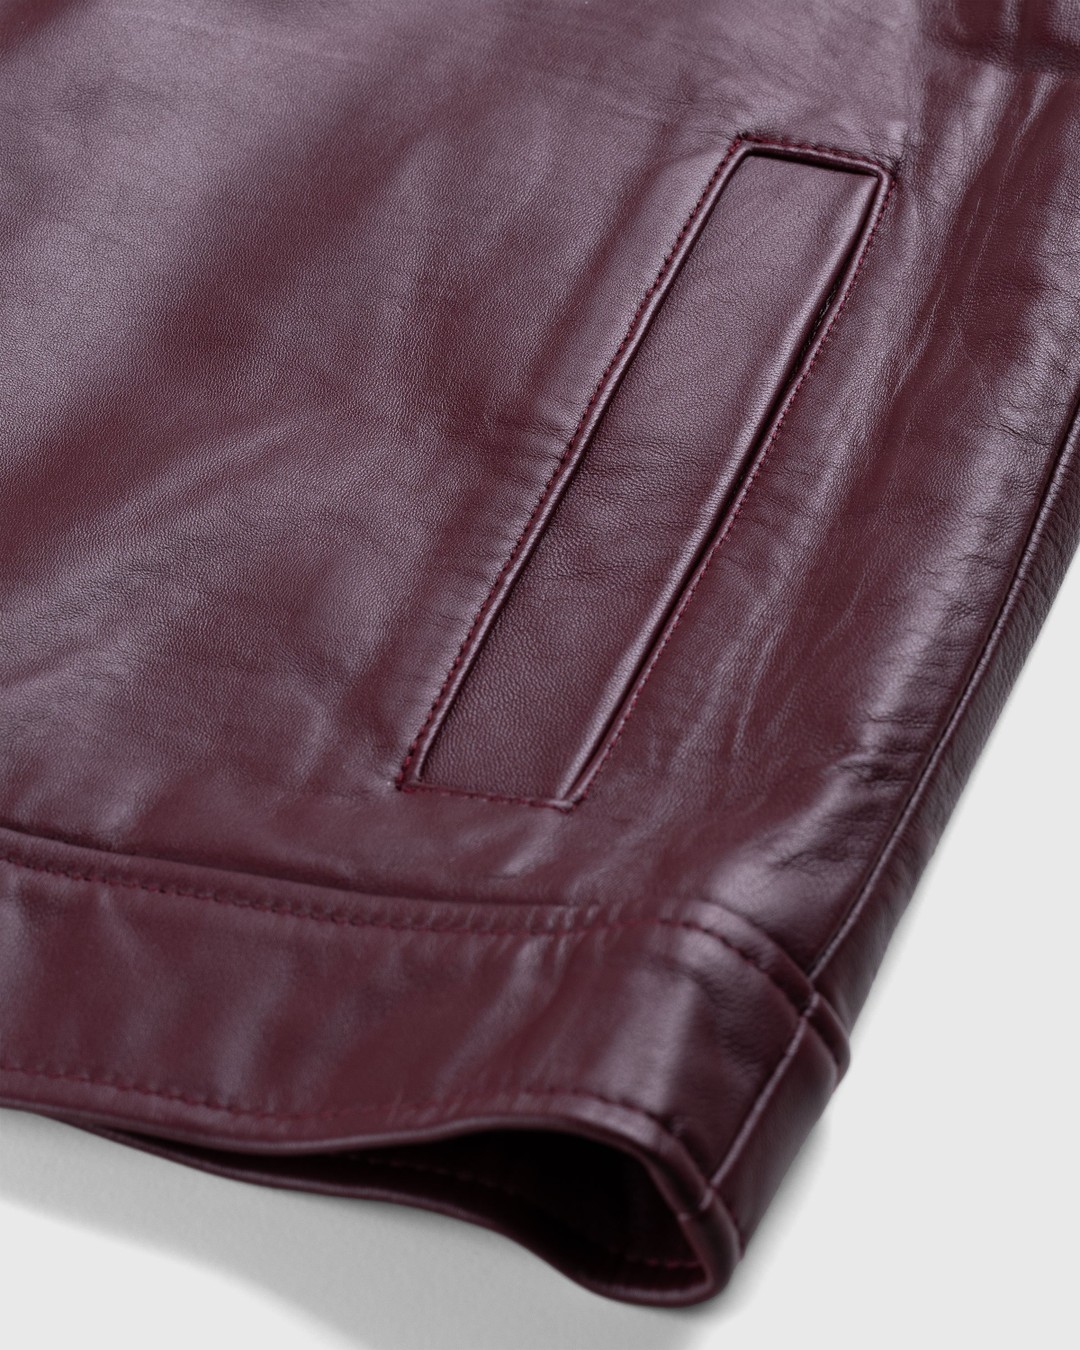 Highsnobiety HS05 – Leather Jacket Burgundy - Outerwear - Red - Image 7